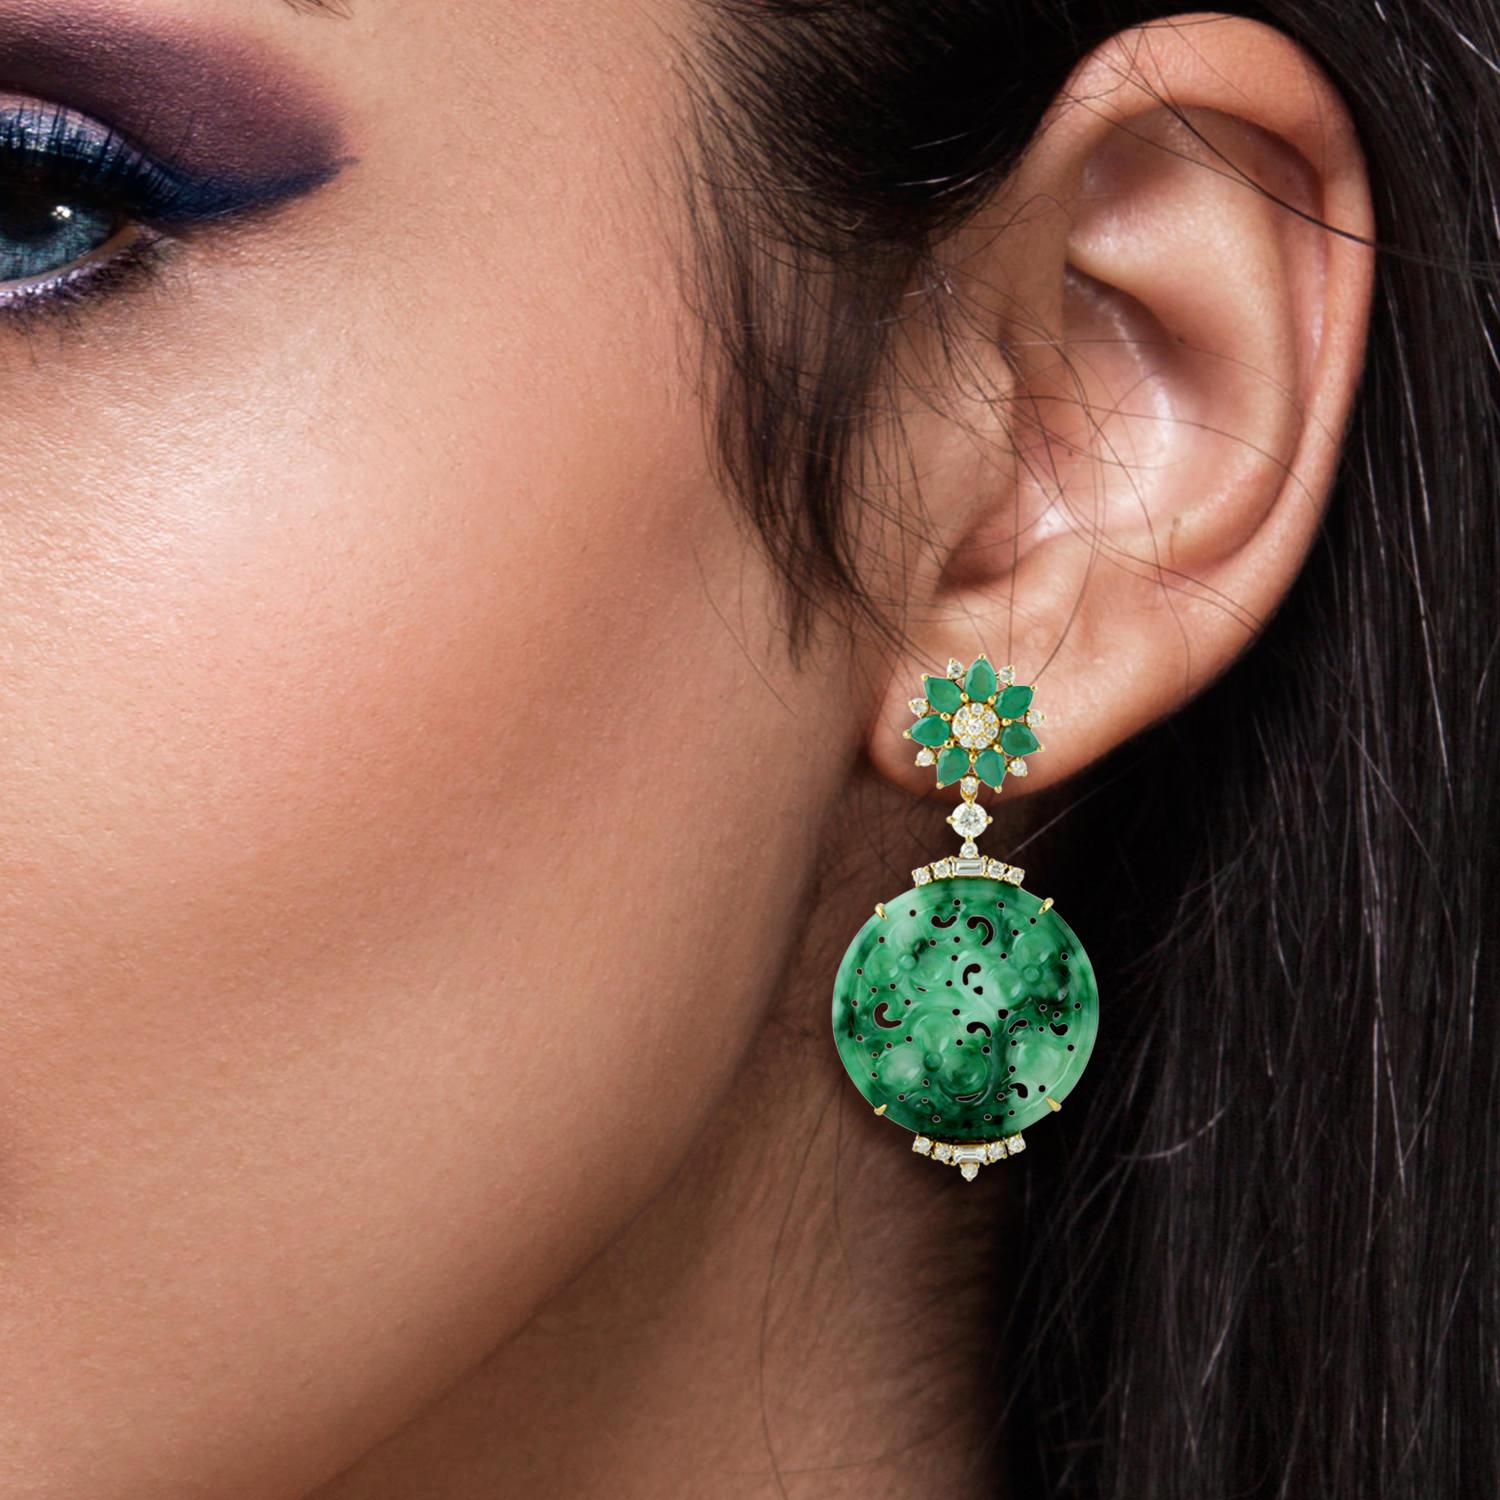 These stunning hand carved Jade earrings are crafted in 18-karat gold. It is set in 21.48 carats Jade, 1.94 carats emerald and 1.15 carats of sparkling diamonds.

FOLLOW  MEGHNA JEWELS storefront to view the latest collection & exclusive pieces. 